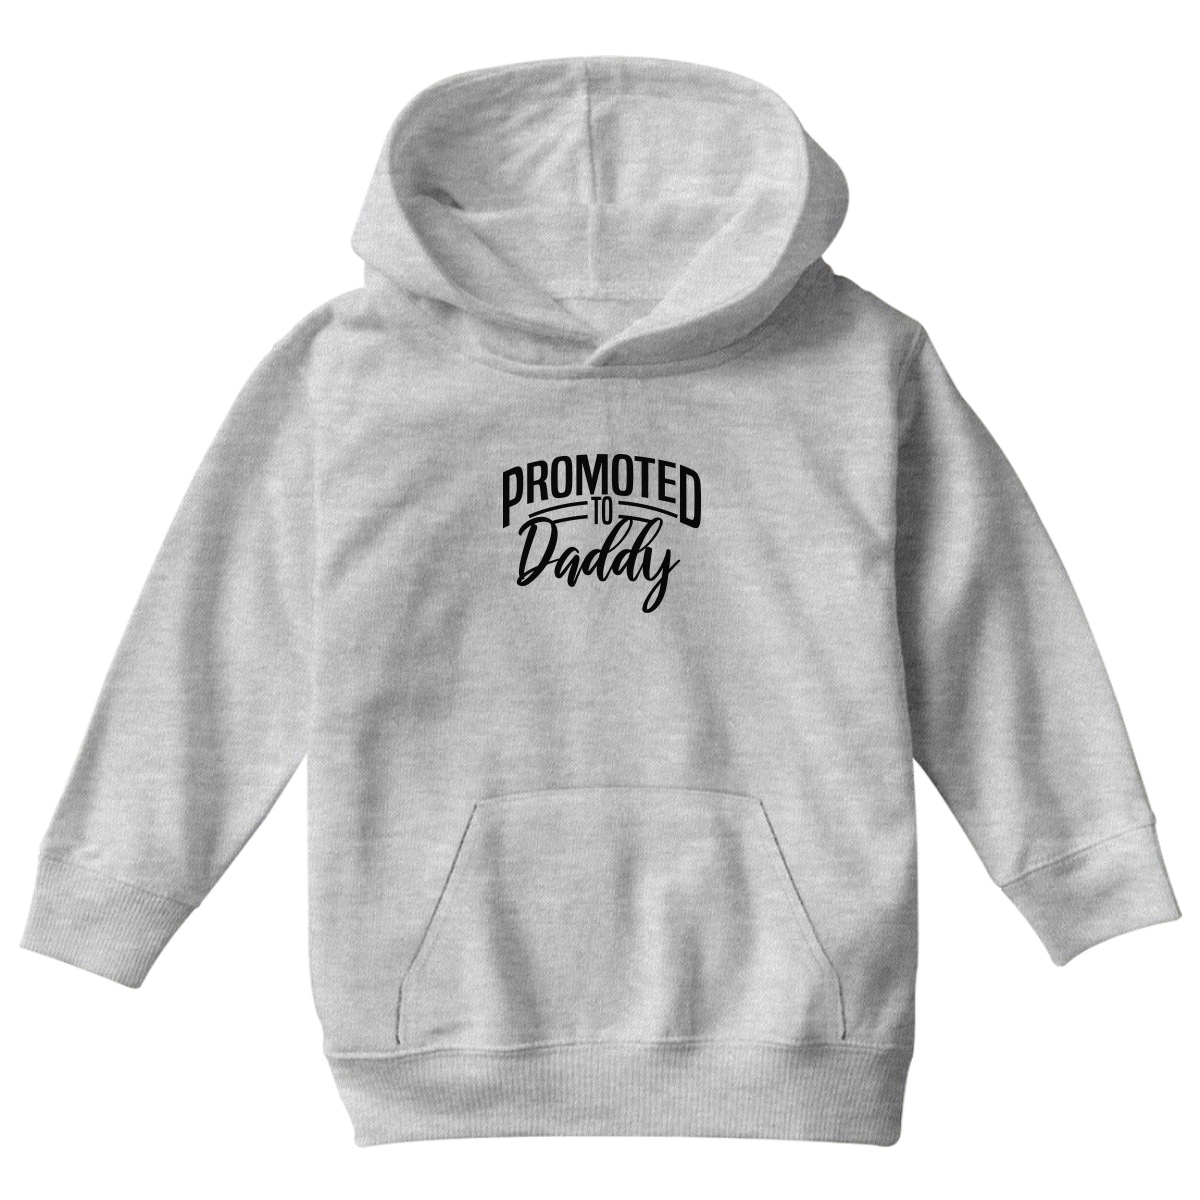 Promoted to daddy Kids Hoodie | Gray